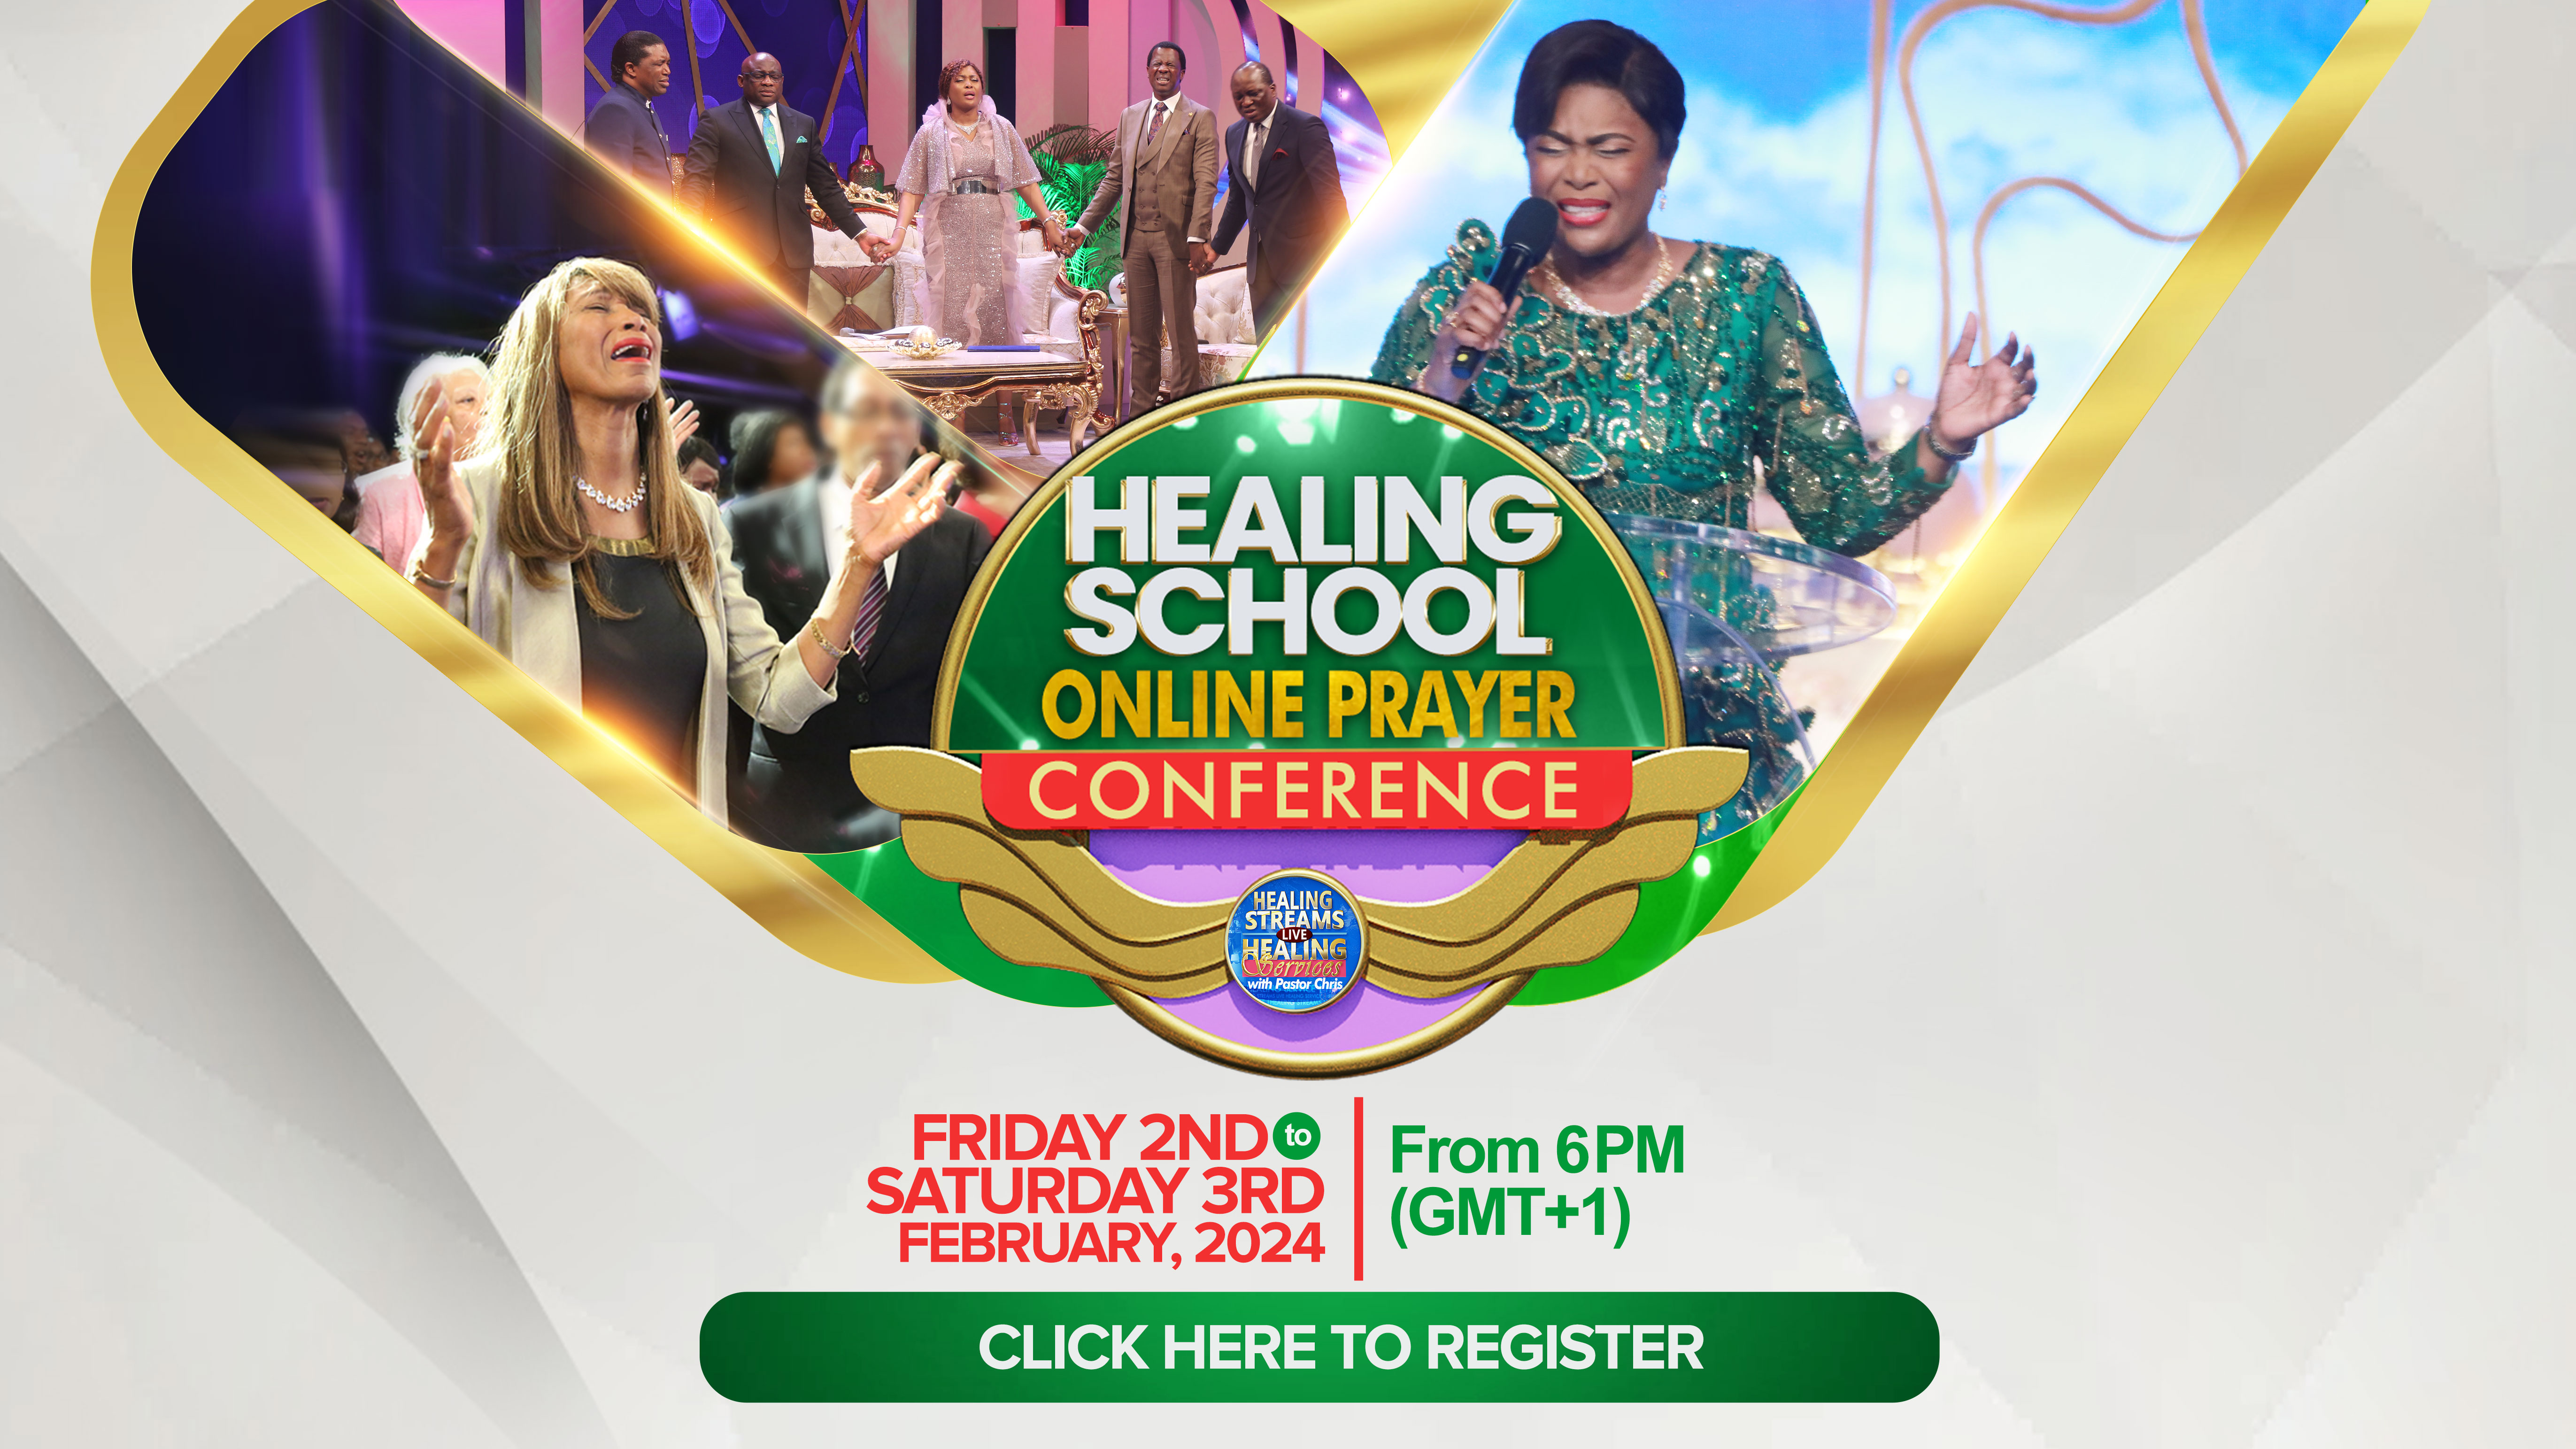 24 HOURS OF CAUSING DYNAMIC CHANGES @ THE HEALING SCHOOL ONLINE PRAYER CONFERENCE